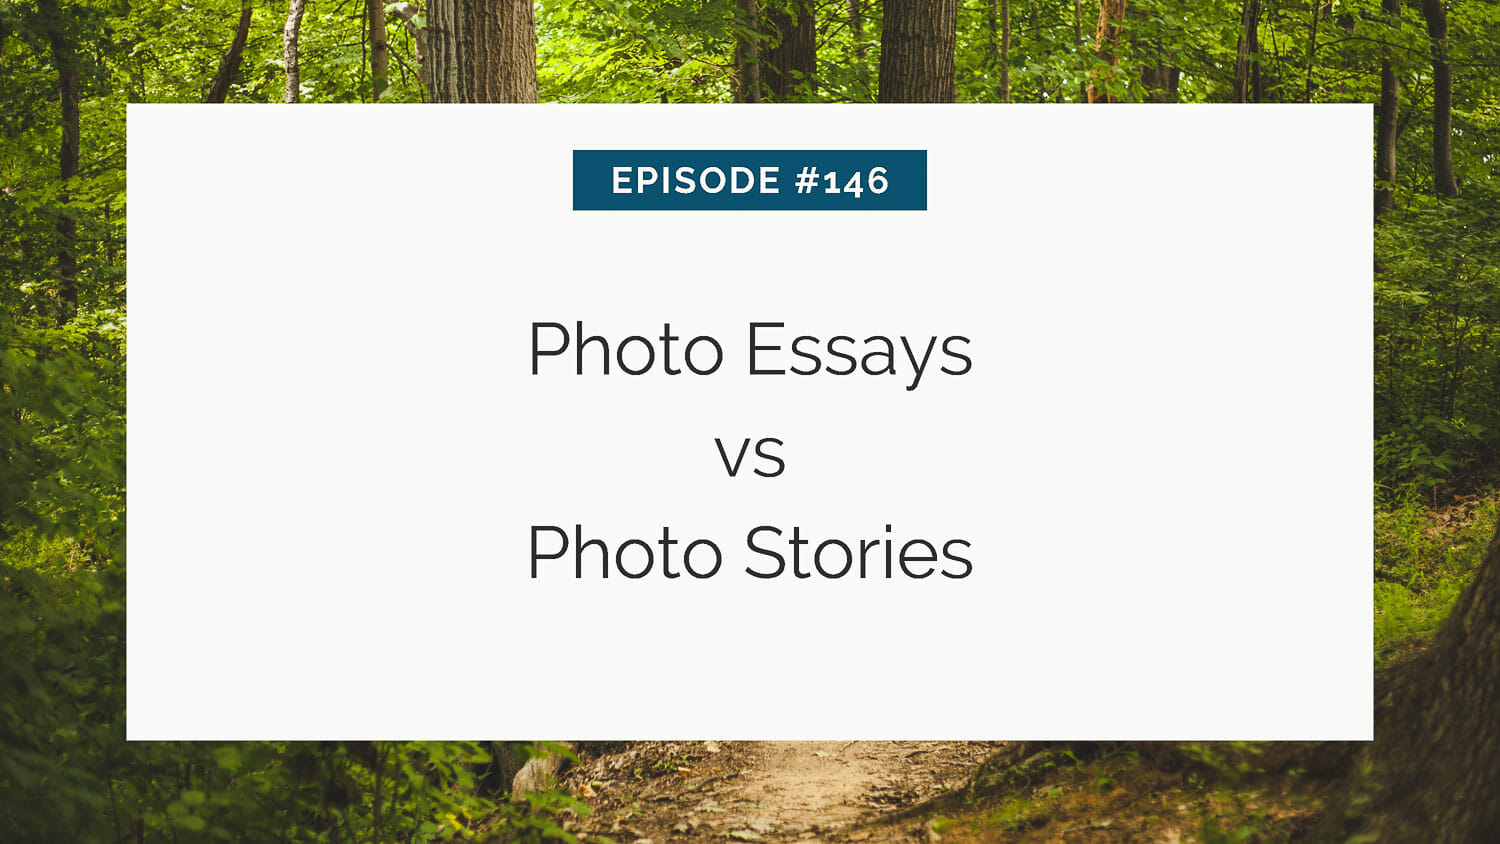 Slide comparing "photo essays" and "photo stories" for episode #146, set against a forest backdrop.